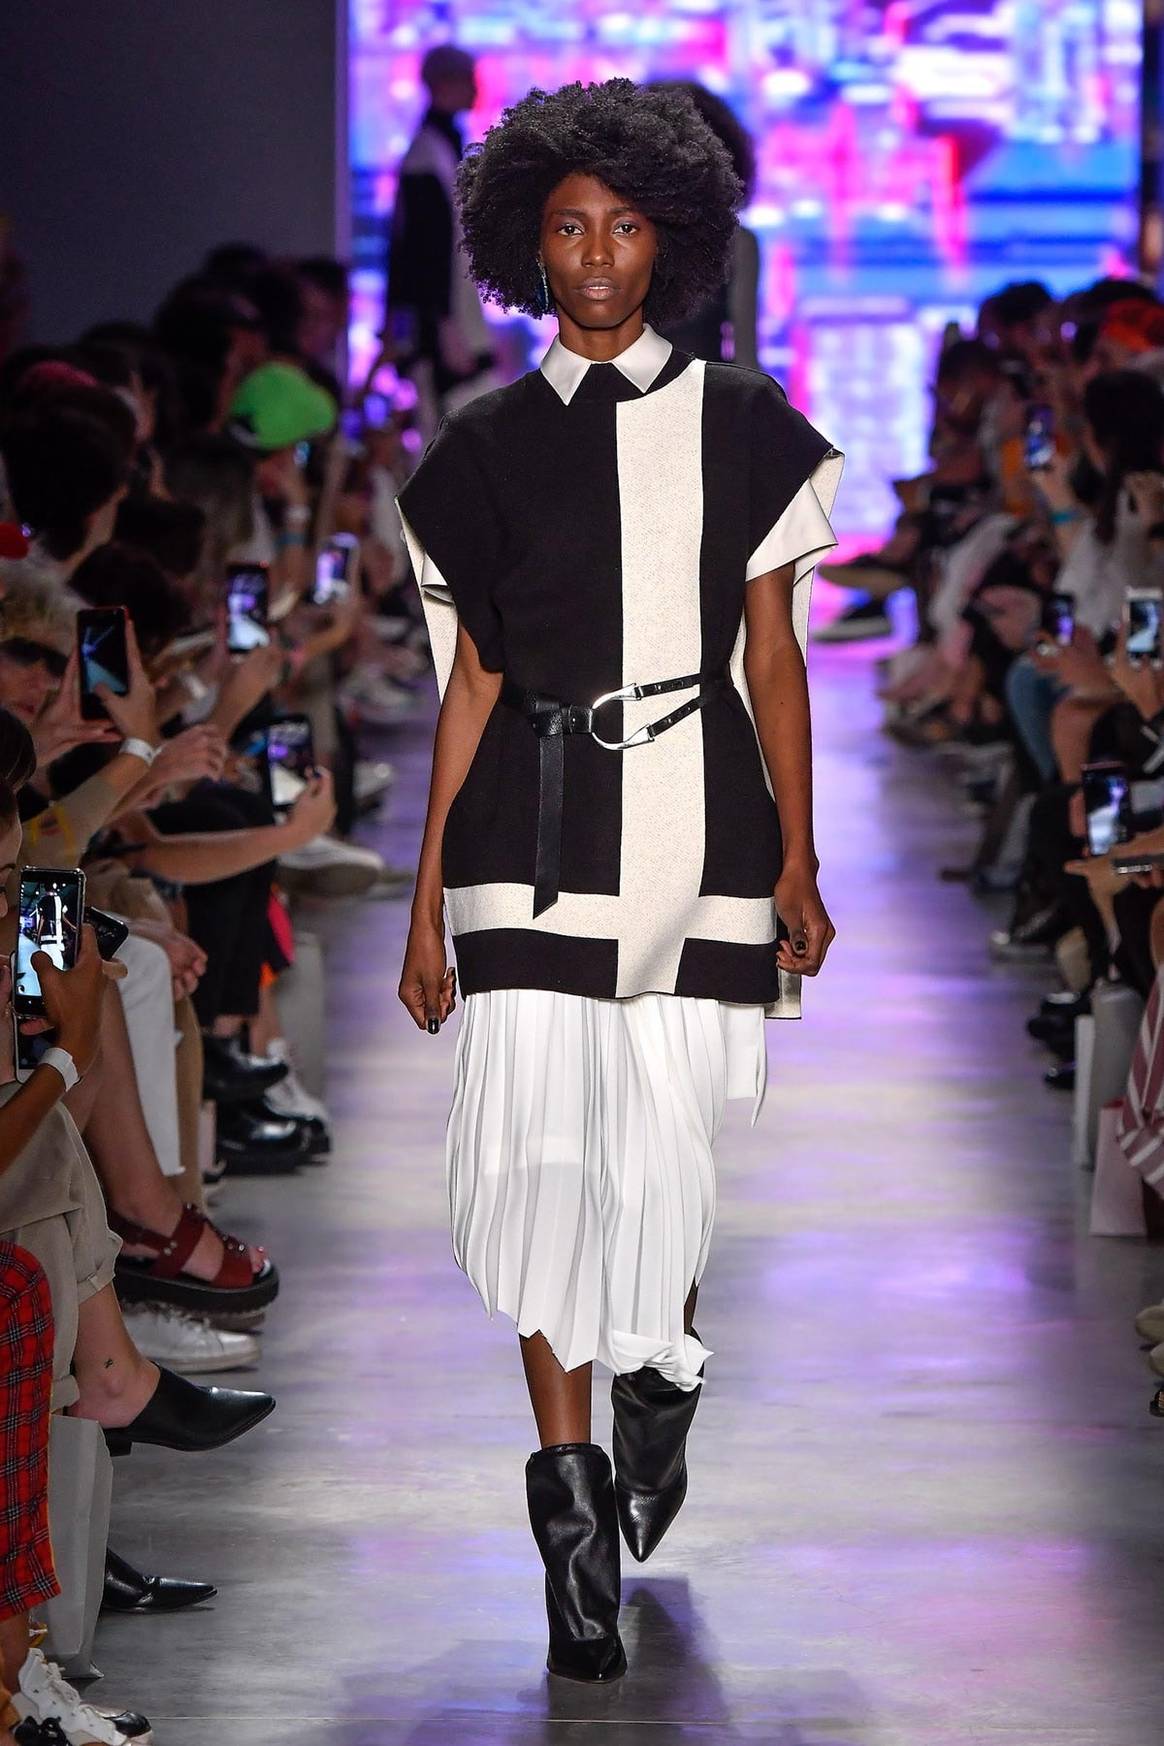 São Paulo Fashion Week: It’s all about reuse and diversity